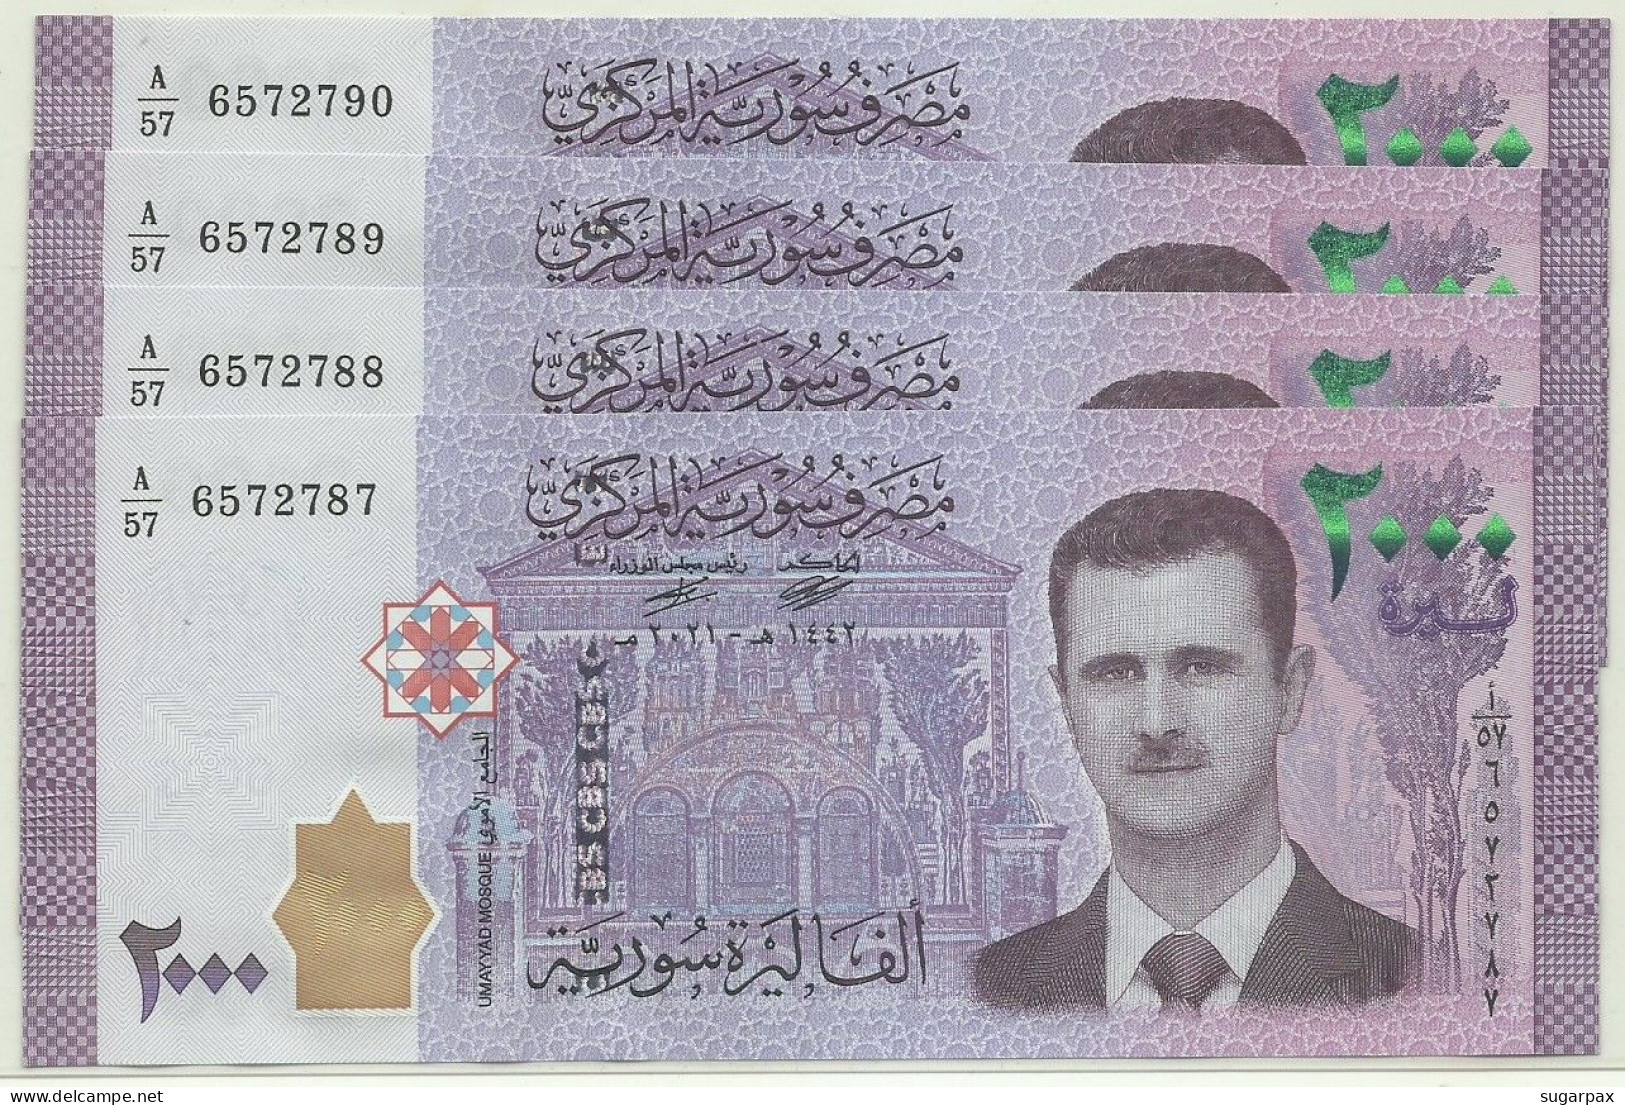 Syria - 4 X 2000 Syrian Pounds - 2021 / AH 1442 - Pick 117.NEW - Unc. - Serie A/57 - 2.000 - Syrie